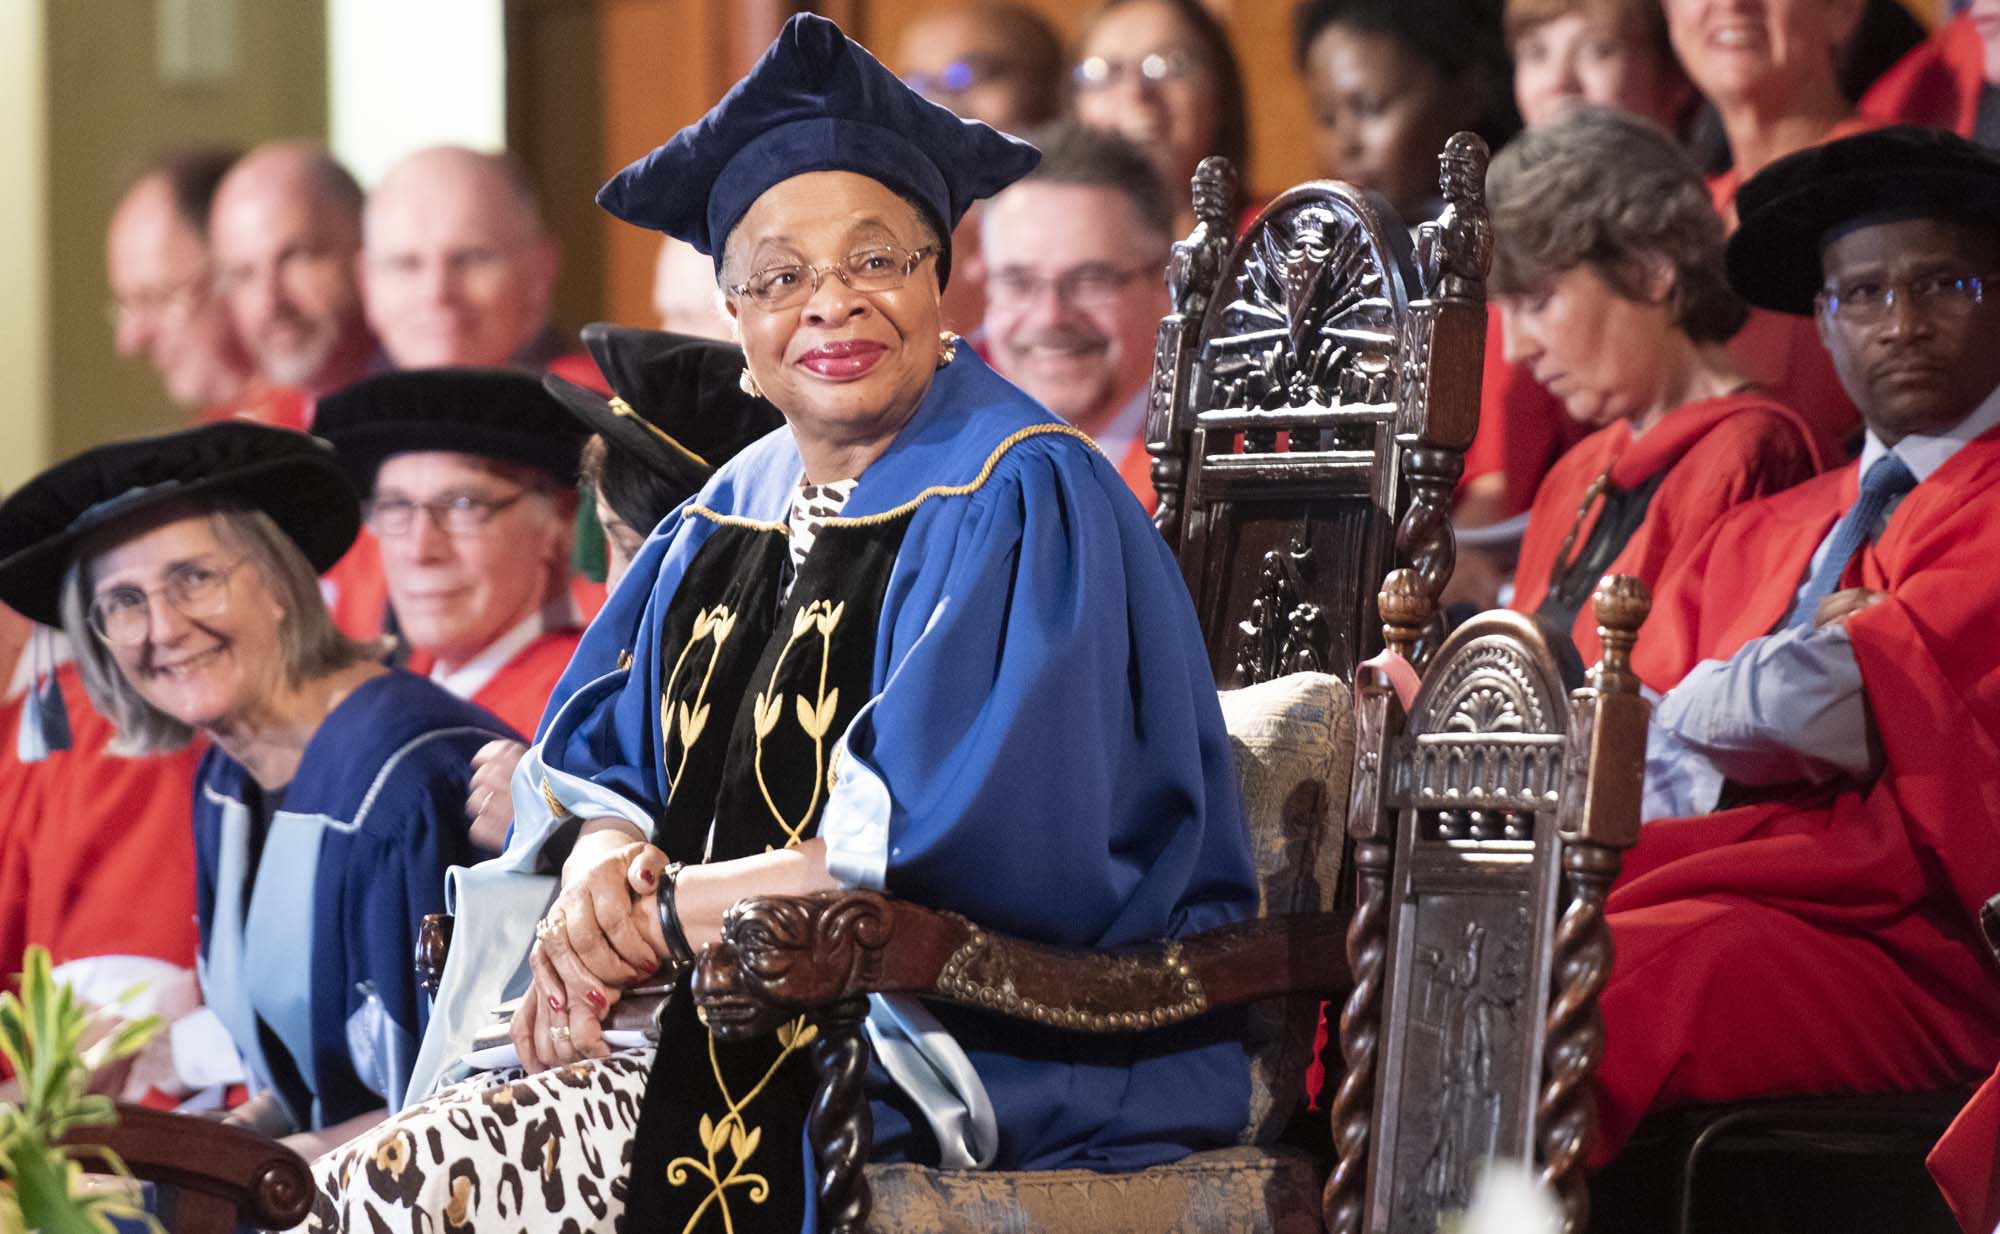 Graça Machel presided over her last graduation season as chancellor of UCT in the newly named Sarah Baartman Hall in December, having served the institution for 20 years.